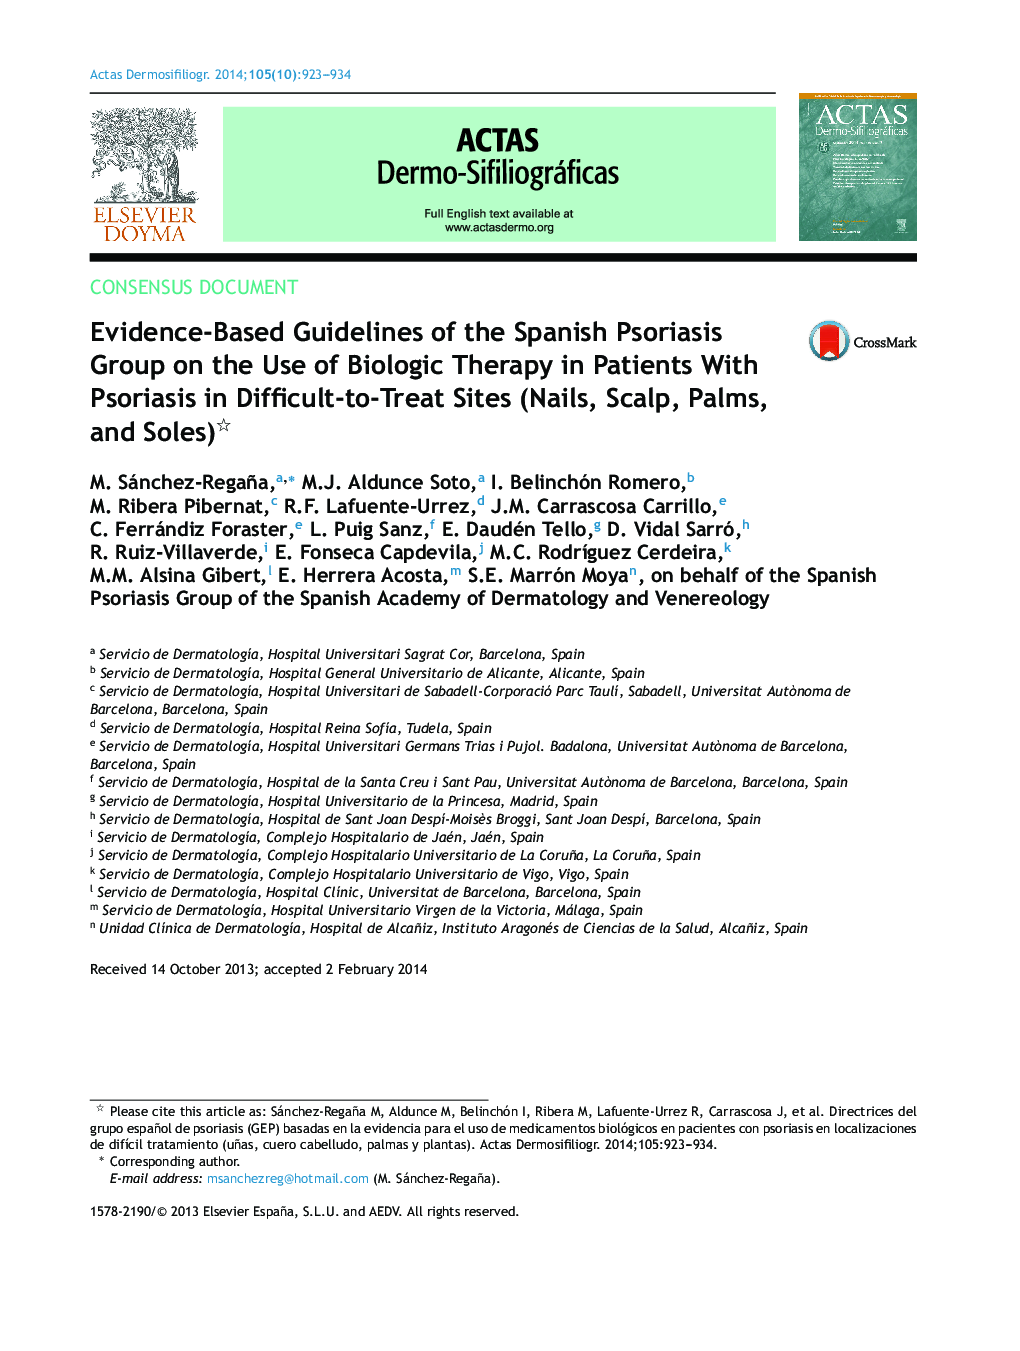 Evidence-Based Guidelines of the Spanish Psoriasis Group on the Use of Biologic Therapy in Patients With Psoriasis in Difficult-to-Treat Sites (Nails, Scalp, Palms, and Soles) 